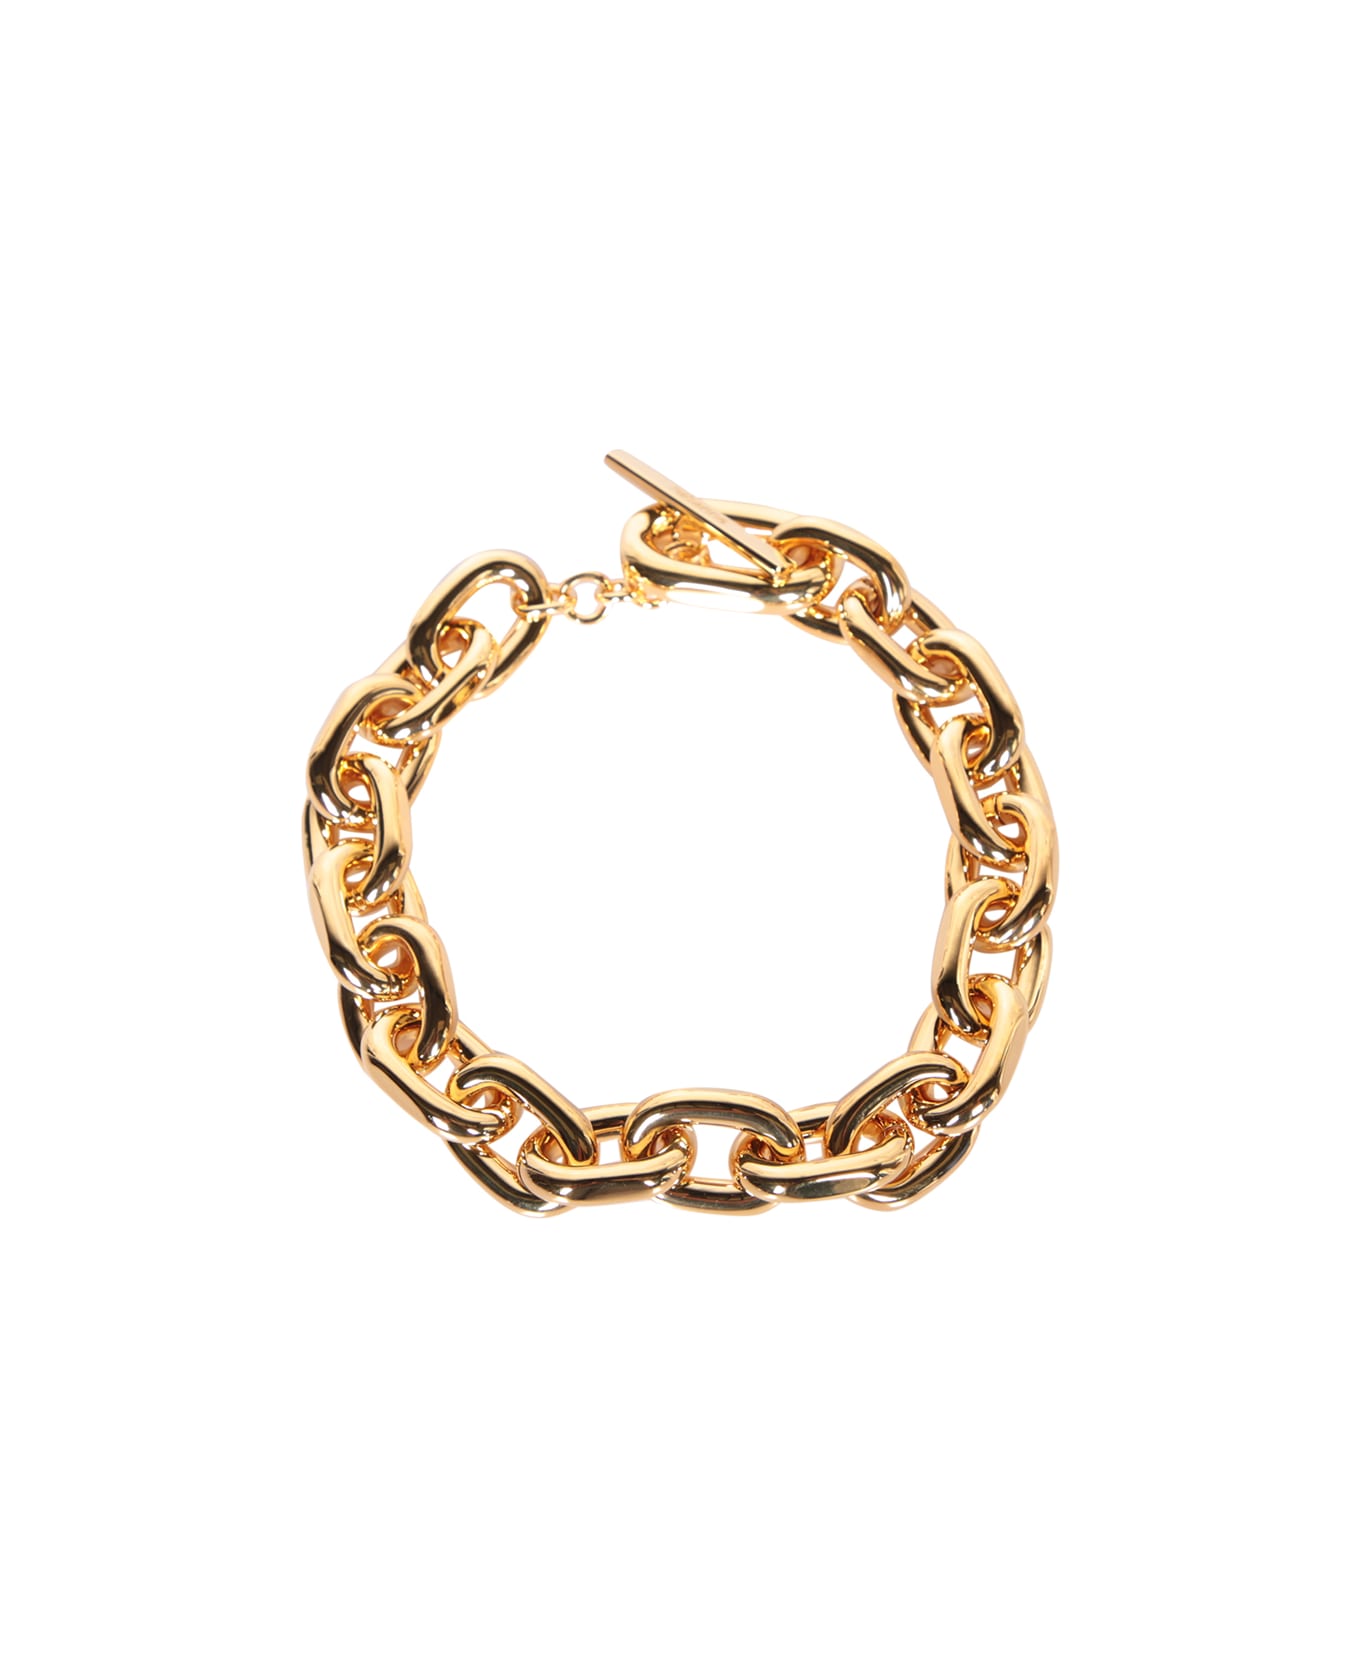 Paco Rabanne Gold Link Chain Necklace - Metallic